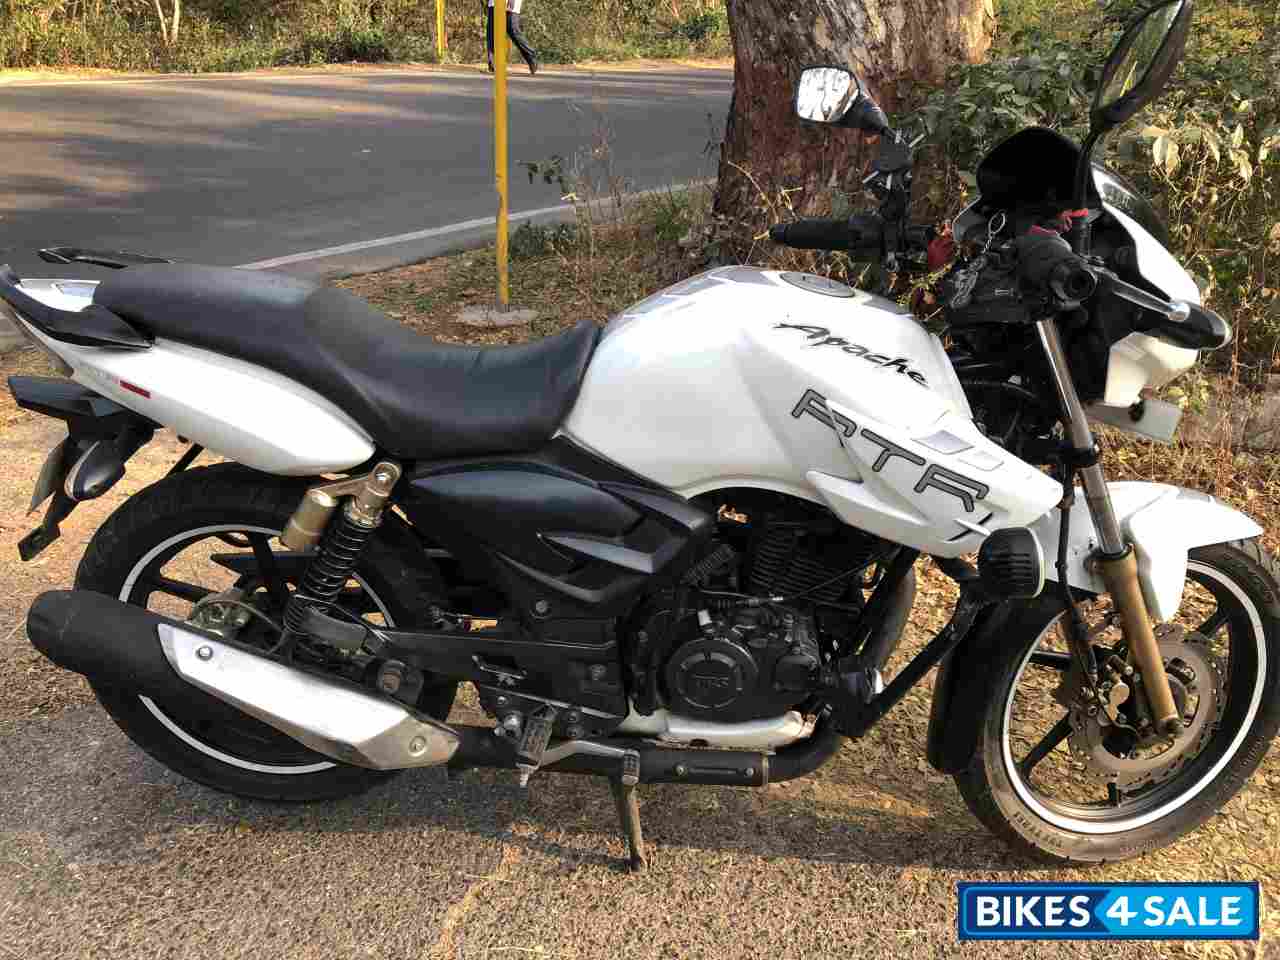 Used 2011 model TVS Apache RTR 180 ABS for sale in Mumbai ...